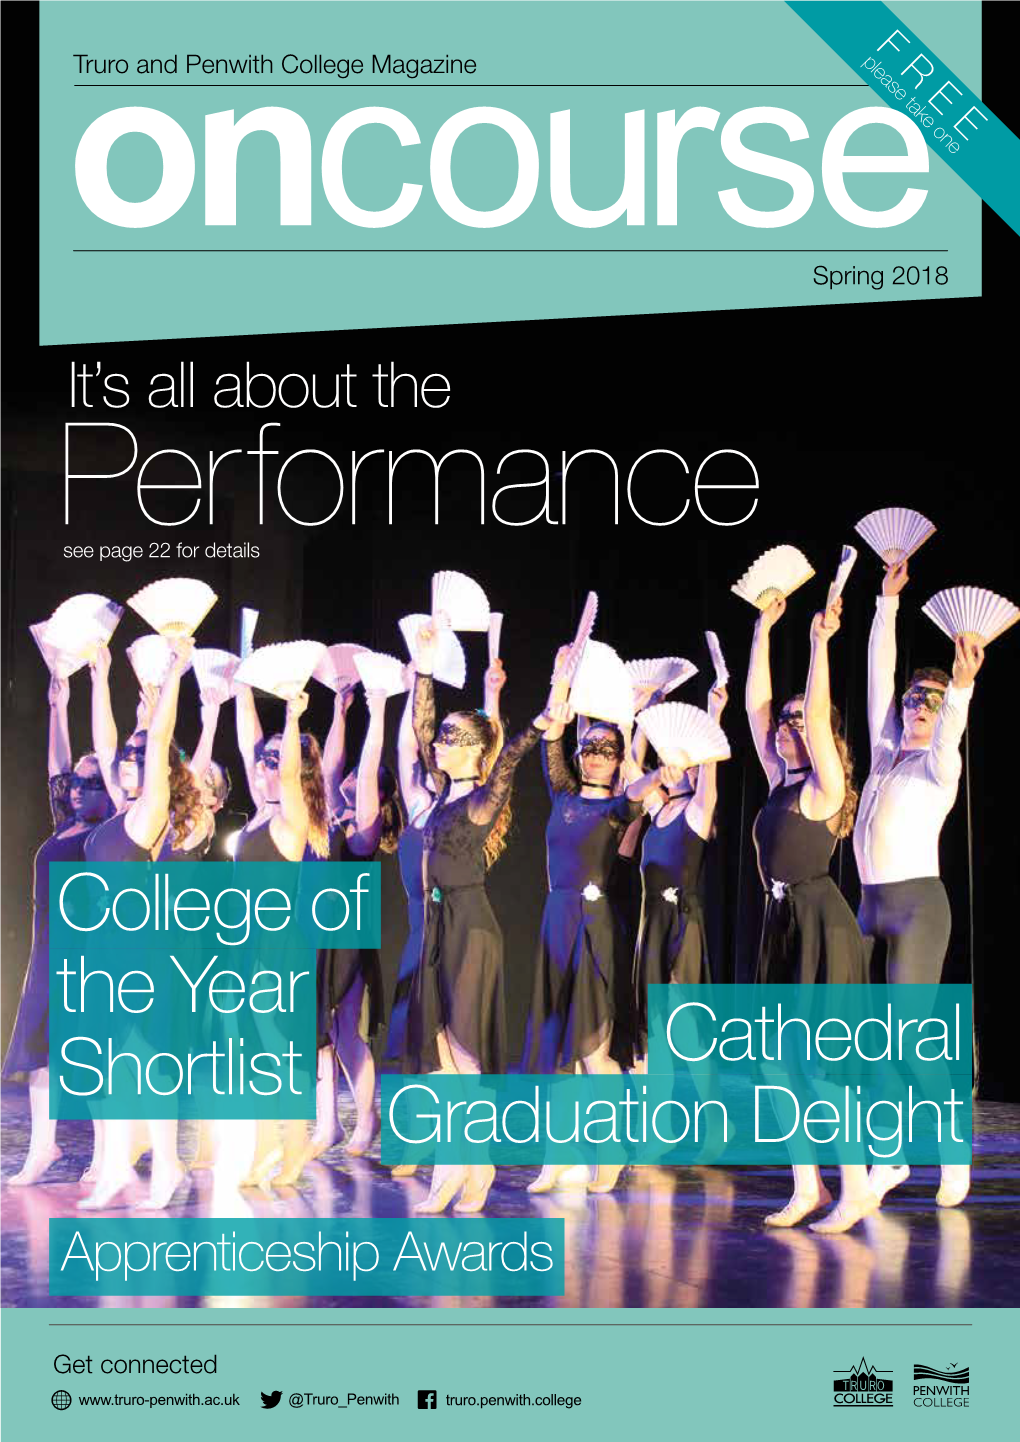 College of the Year Shortlist Cathedral Graduation Delight